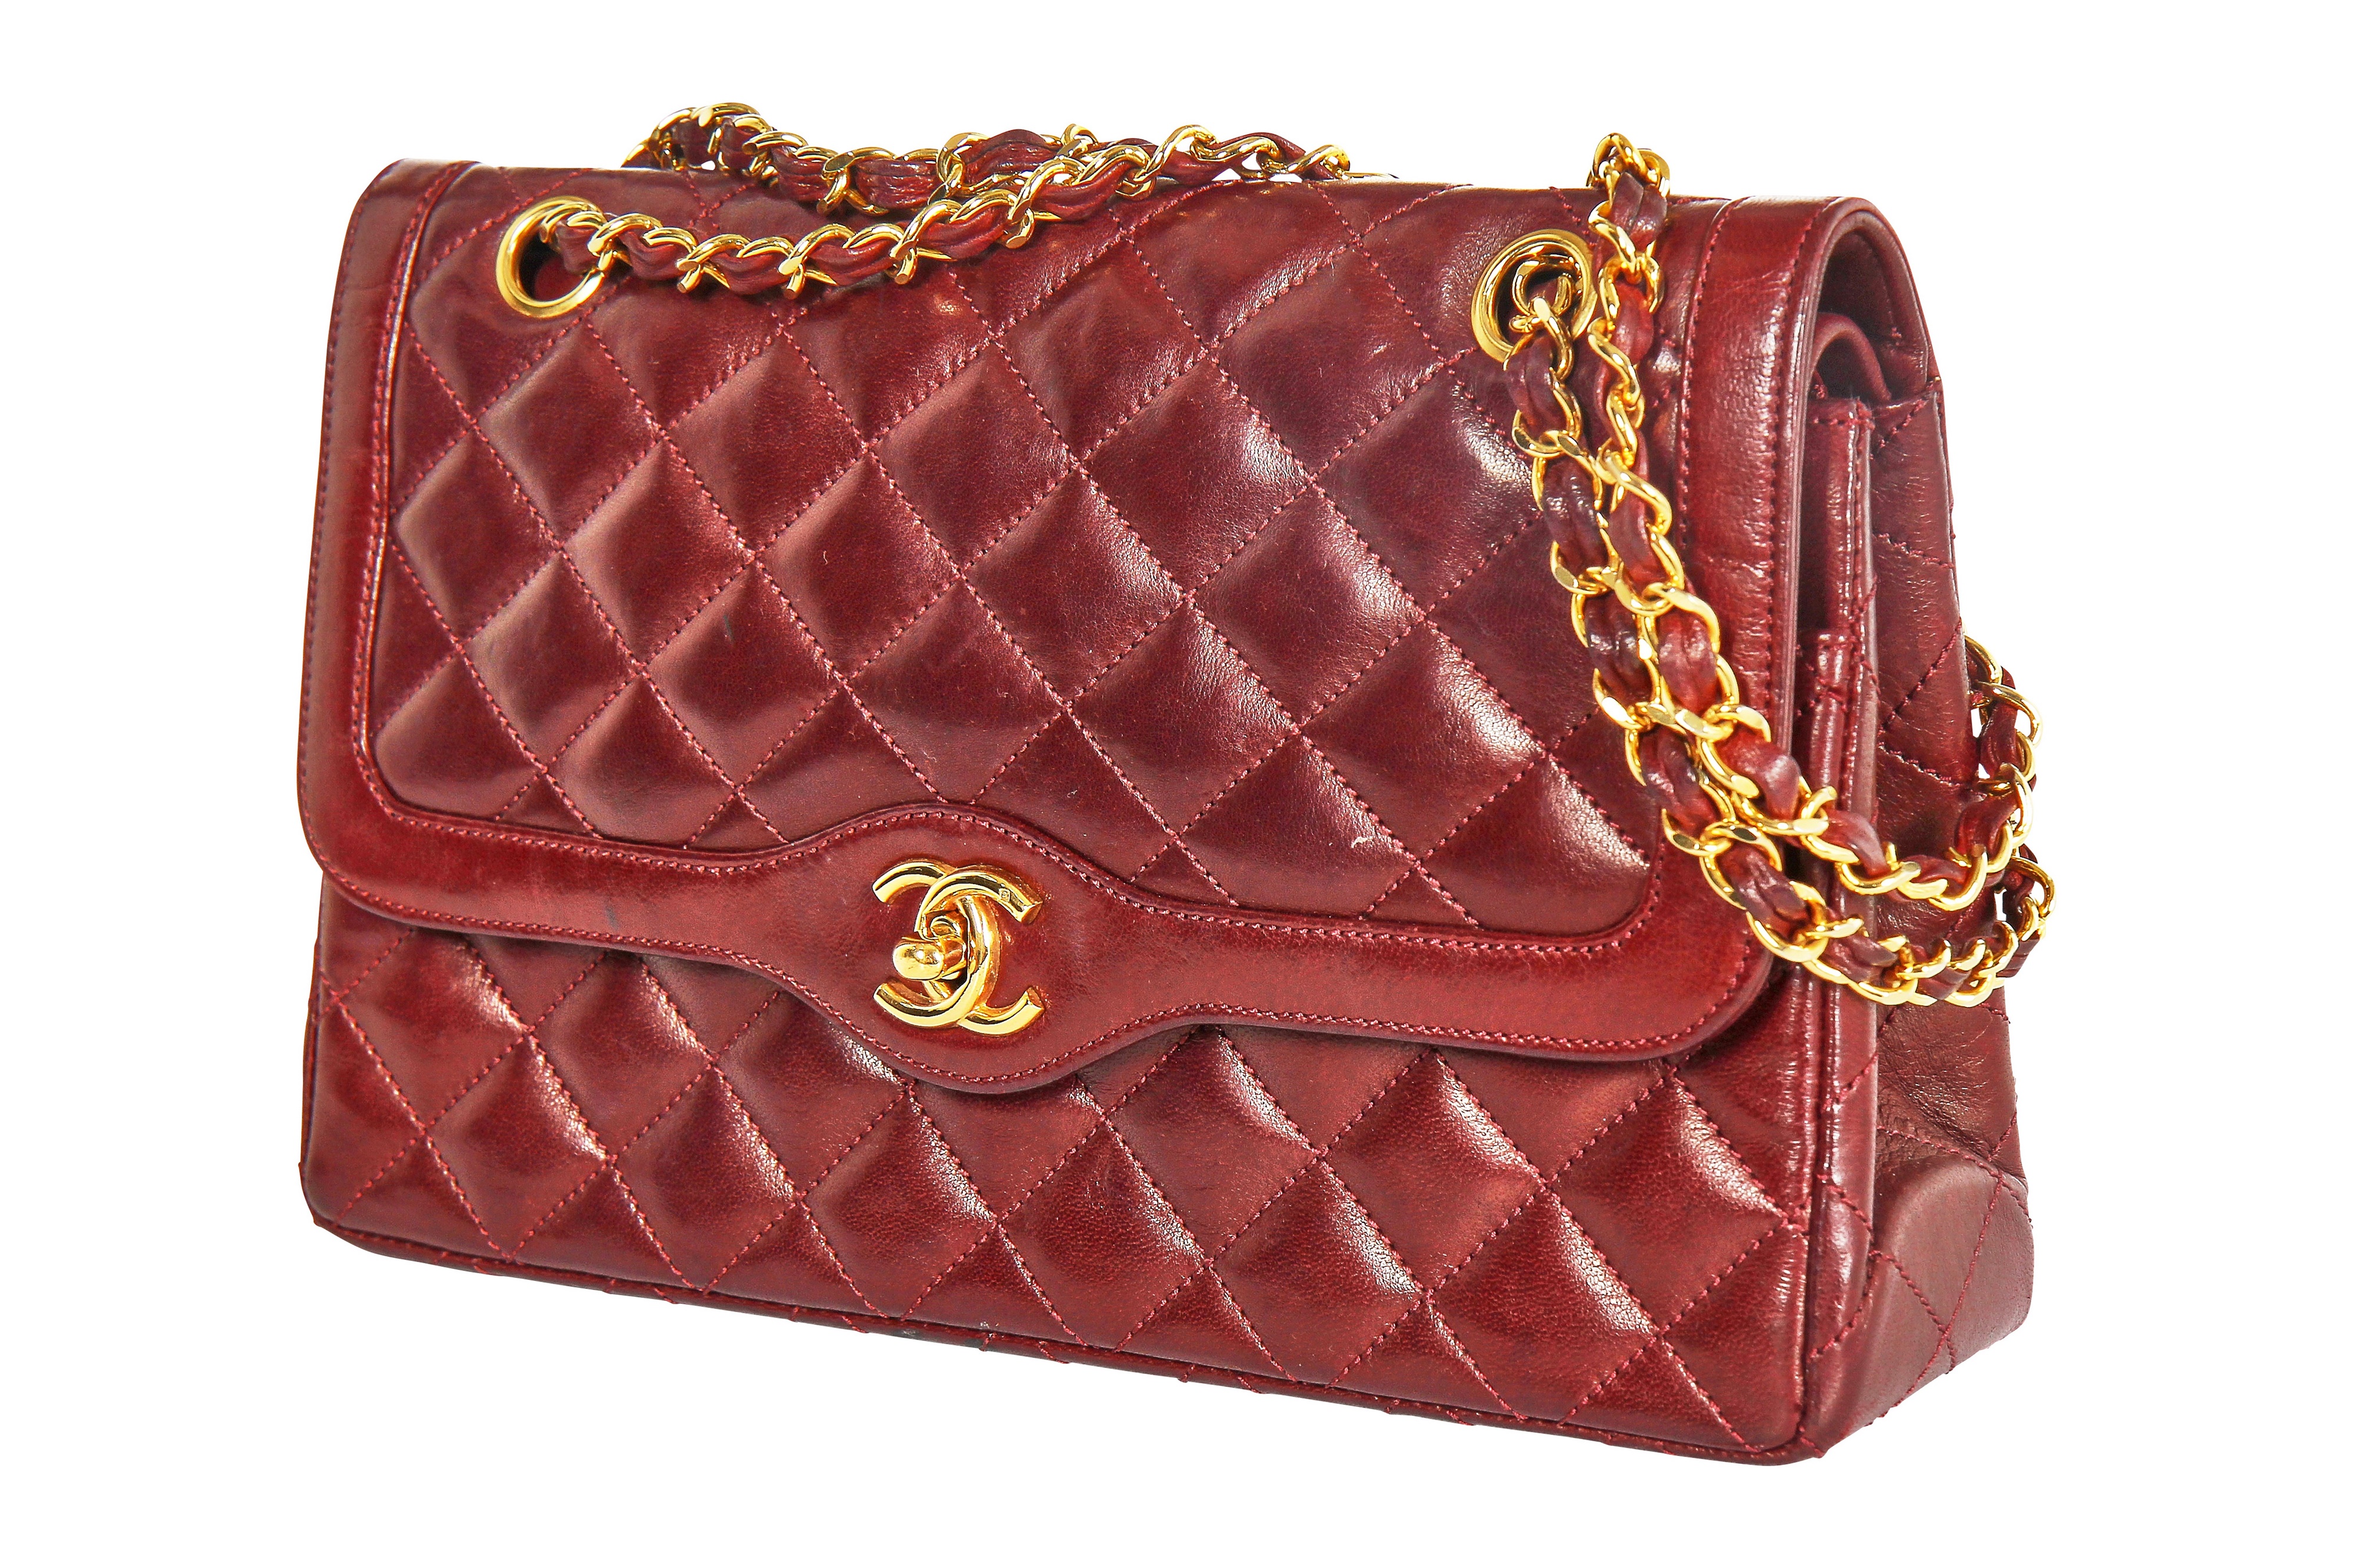 Lot 2 - A Chanel bordeaux-red quilted lambskin leather